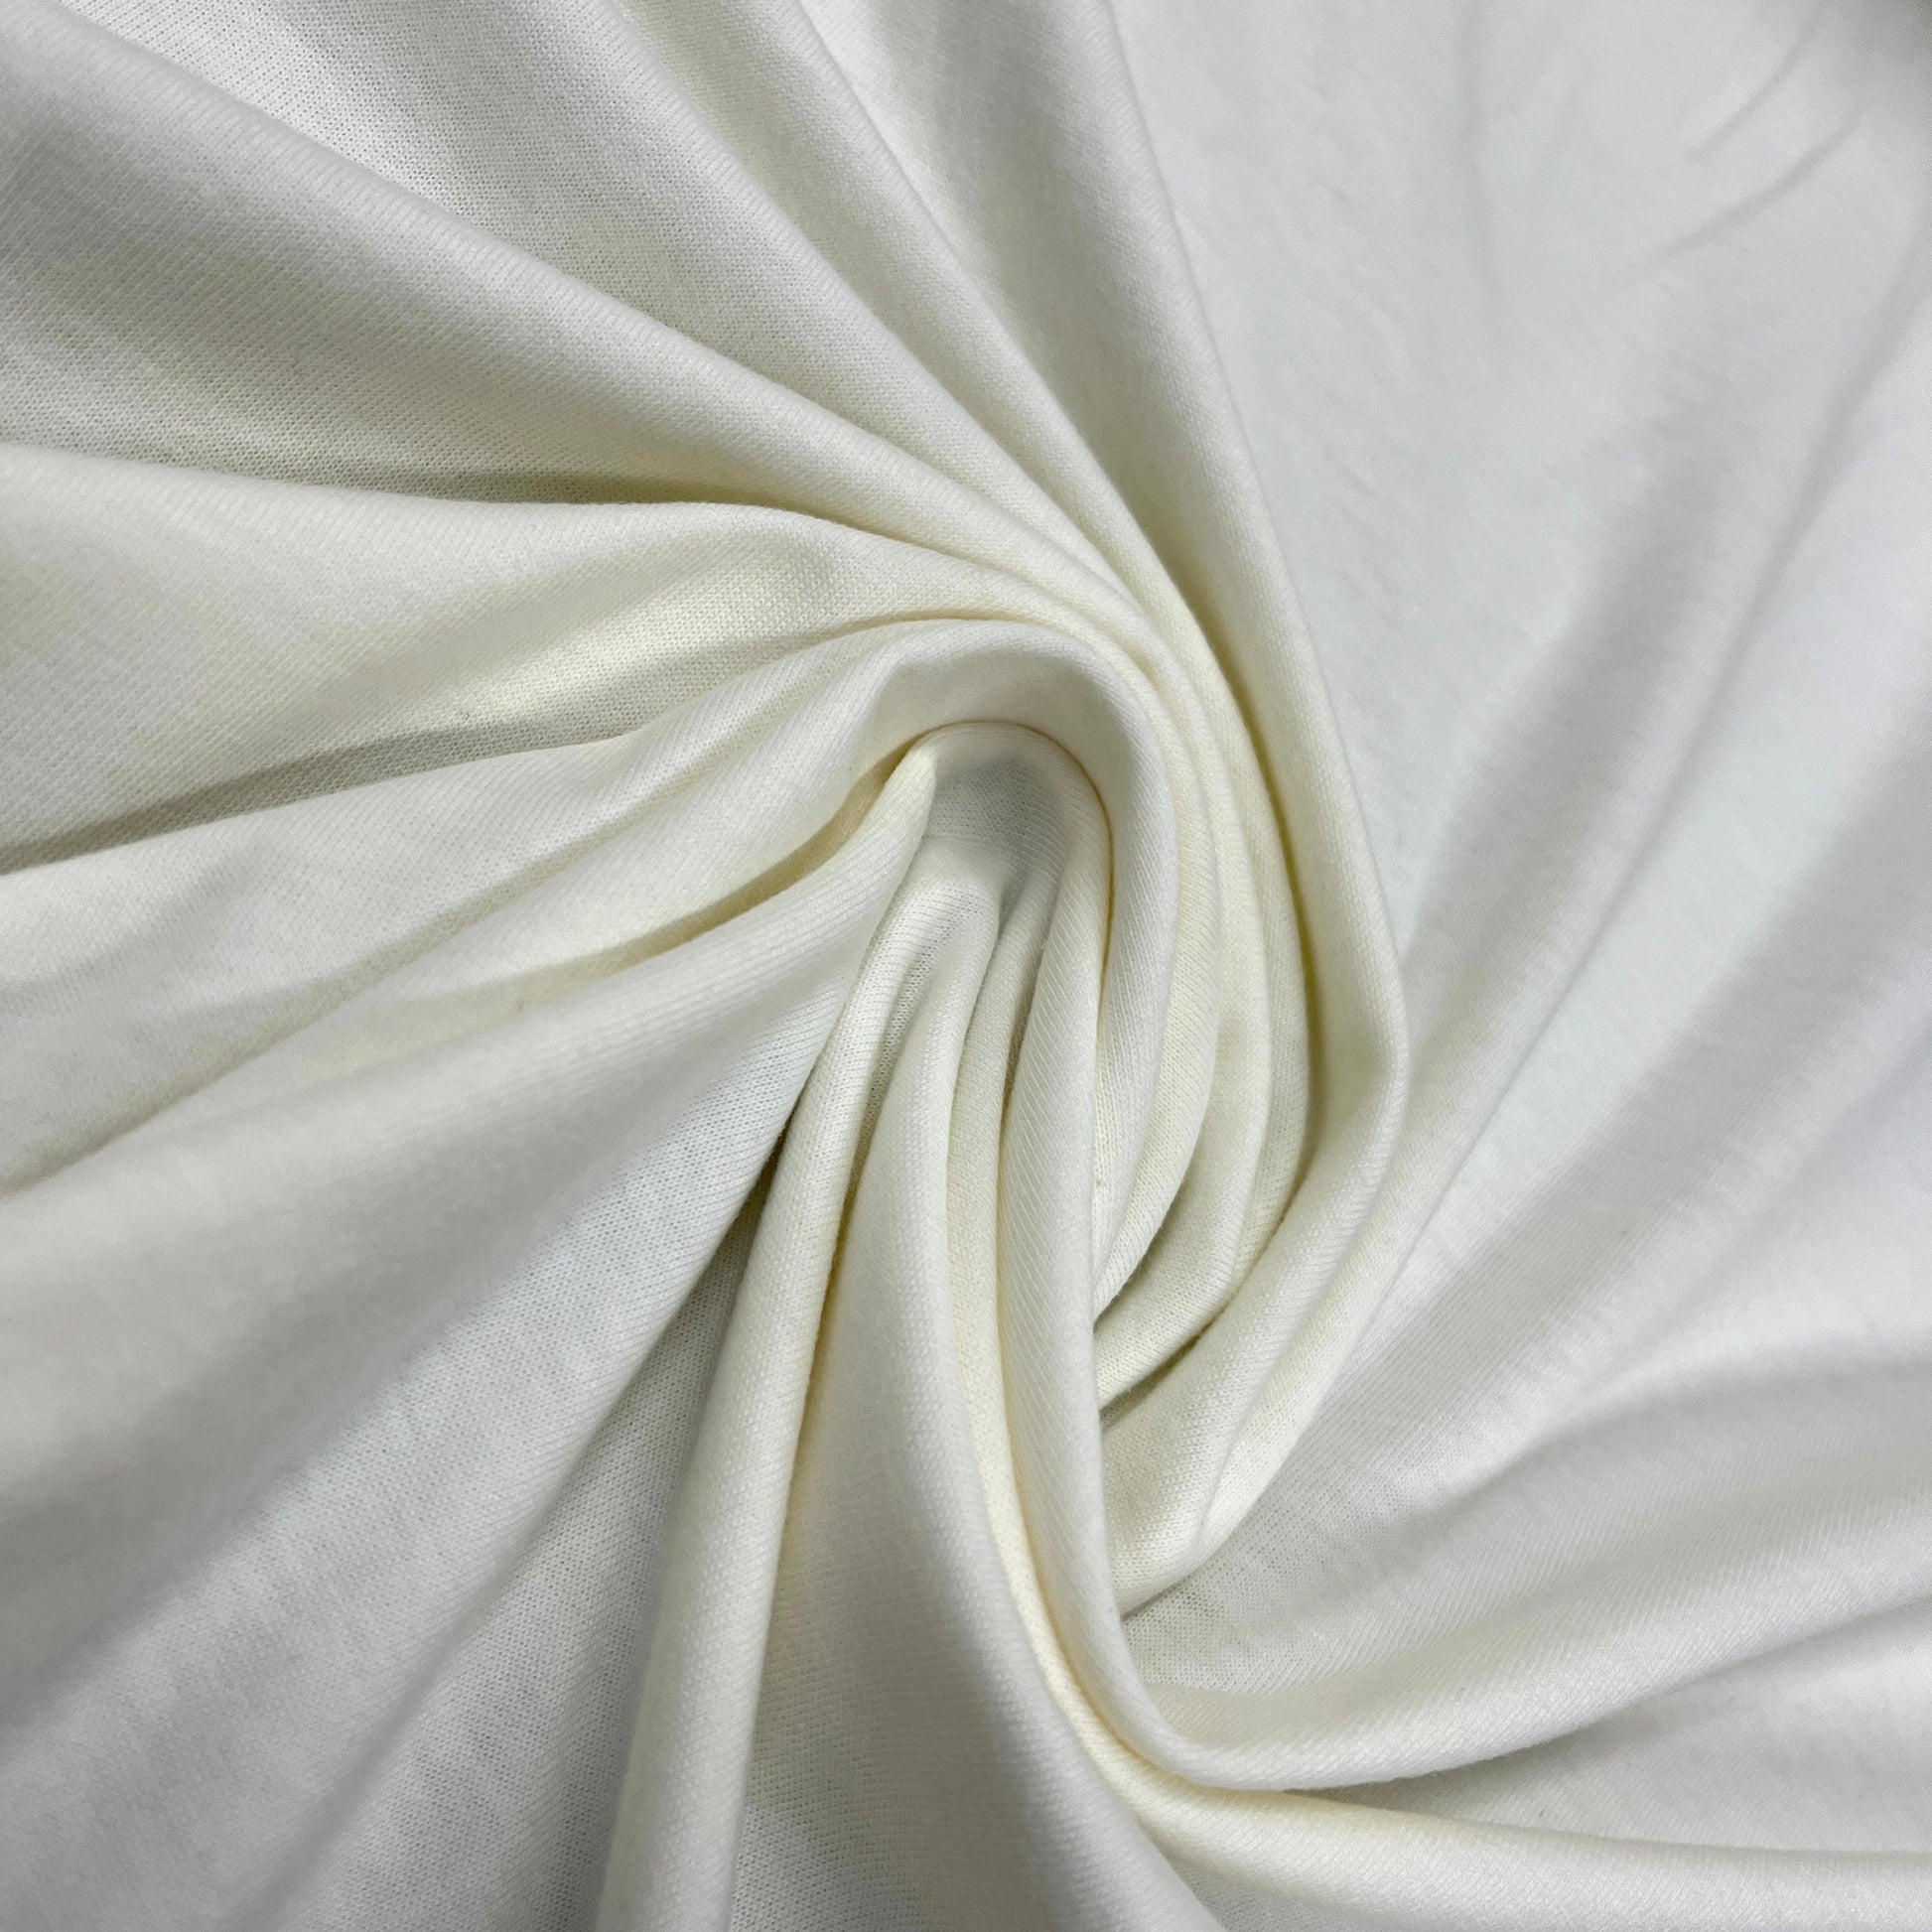 Off-White Organic Cotton Jersey Fabric - 130 GSM - Grown in the USA - Nature's Fabrics